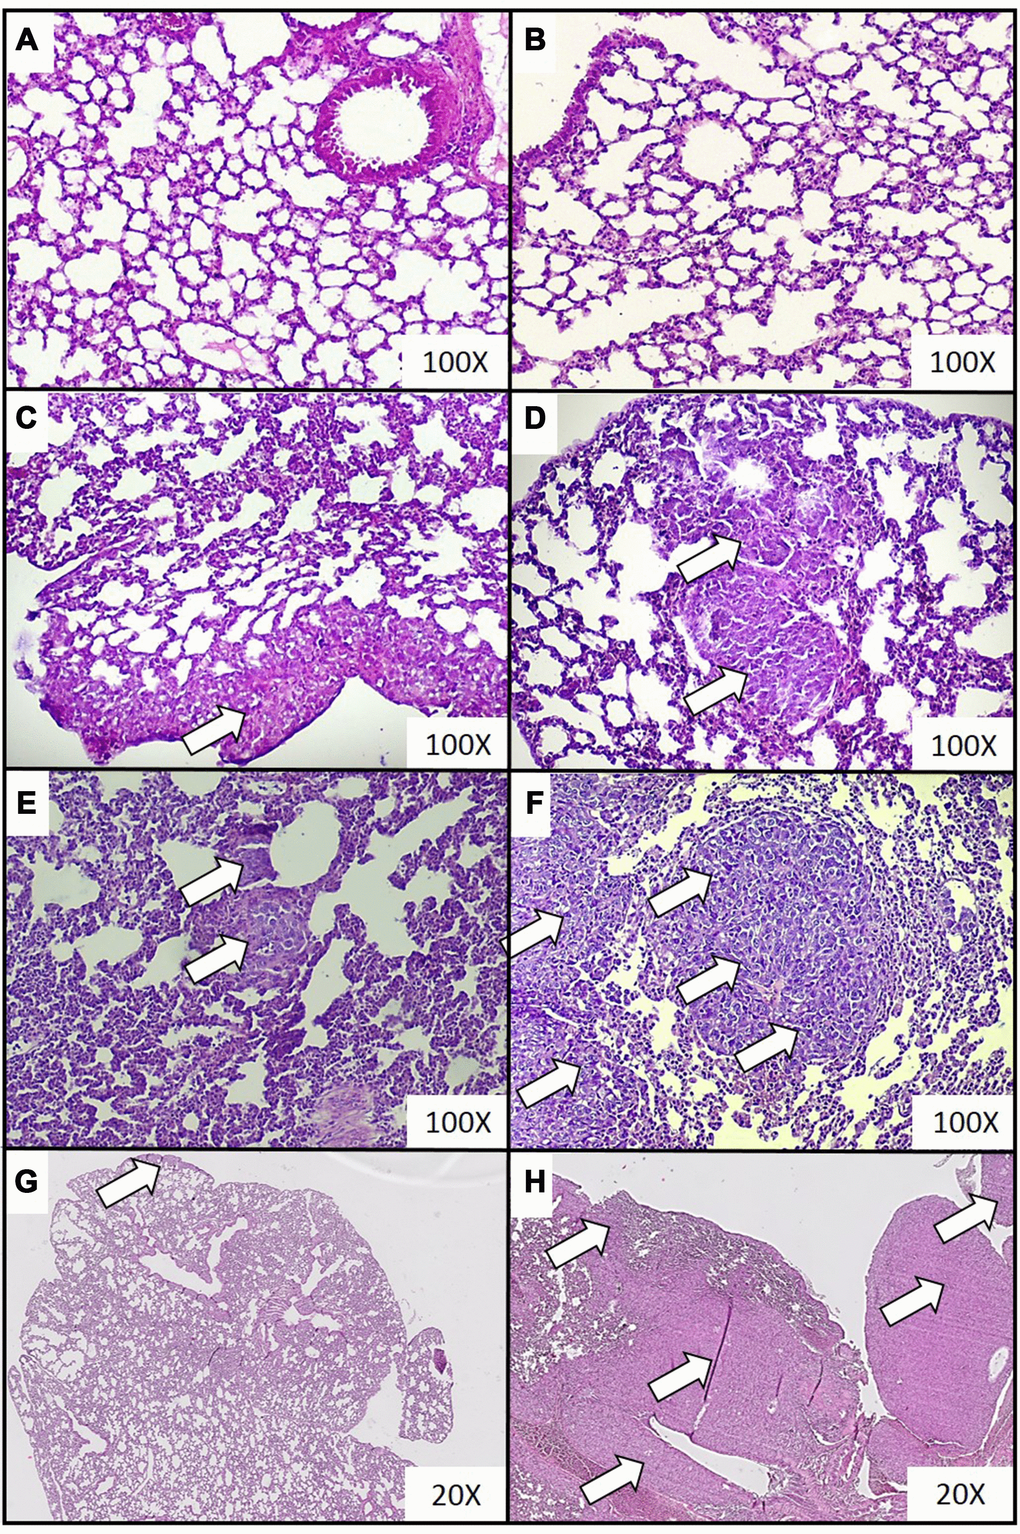 Representative histopathological images of breast cancer metastases in lungs of mice injected with 4T1 cancer cells. Breast cancer metastasis was investigated by histological examination of the lungs isolated from mice during necropsy carried out in animals injected with saline (control) (A) or after 0 (B), 2 (C), 3 (D), 4 (E) and 5 (F) weeks from the injection of 4T1 cancer cells. Hematoxylin and eosin staining, magnification of 100X. Additional images under lower optical magnification (20x) present breast cancer metastasis in samples of lungs resected from mice at the second (G) and fifth (H) week of breast cancer development. Cancer metastases are marked with white arrows. More experimental details are given in the Materials and methods section.